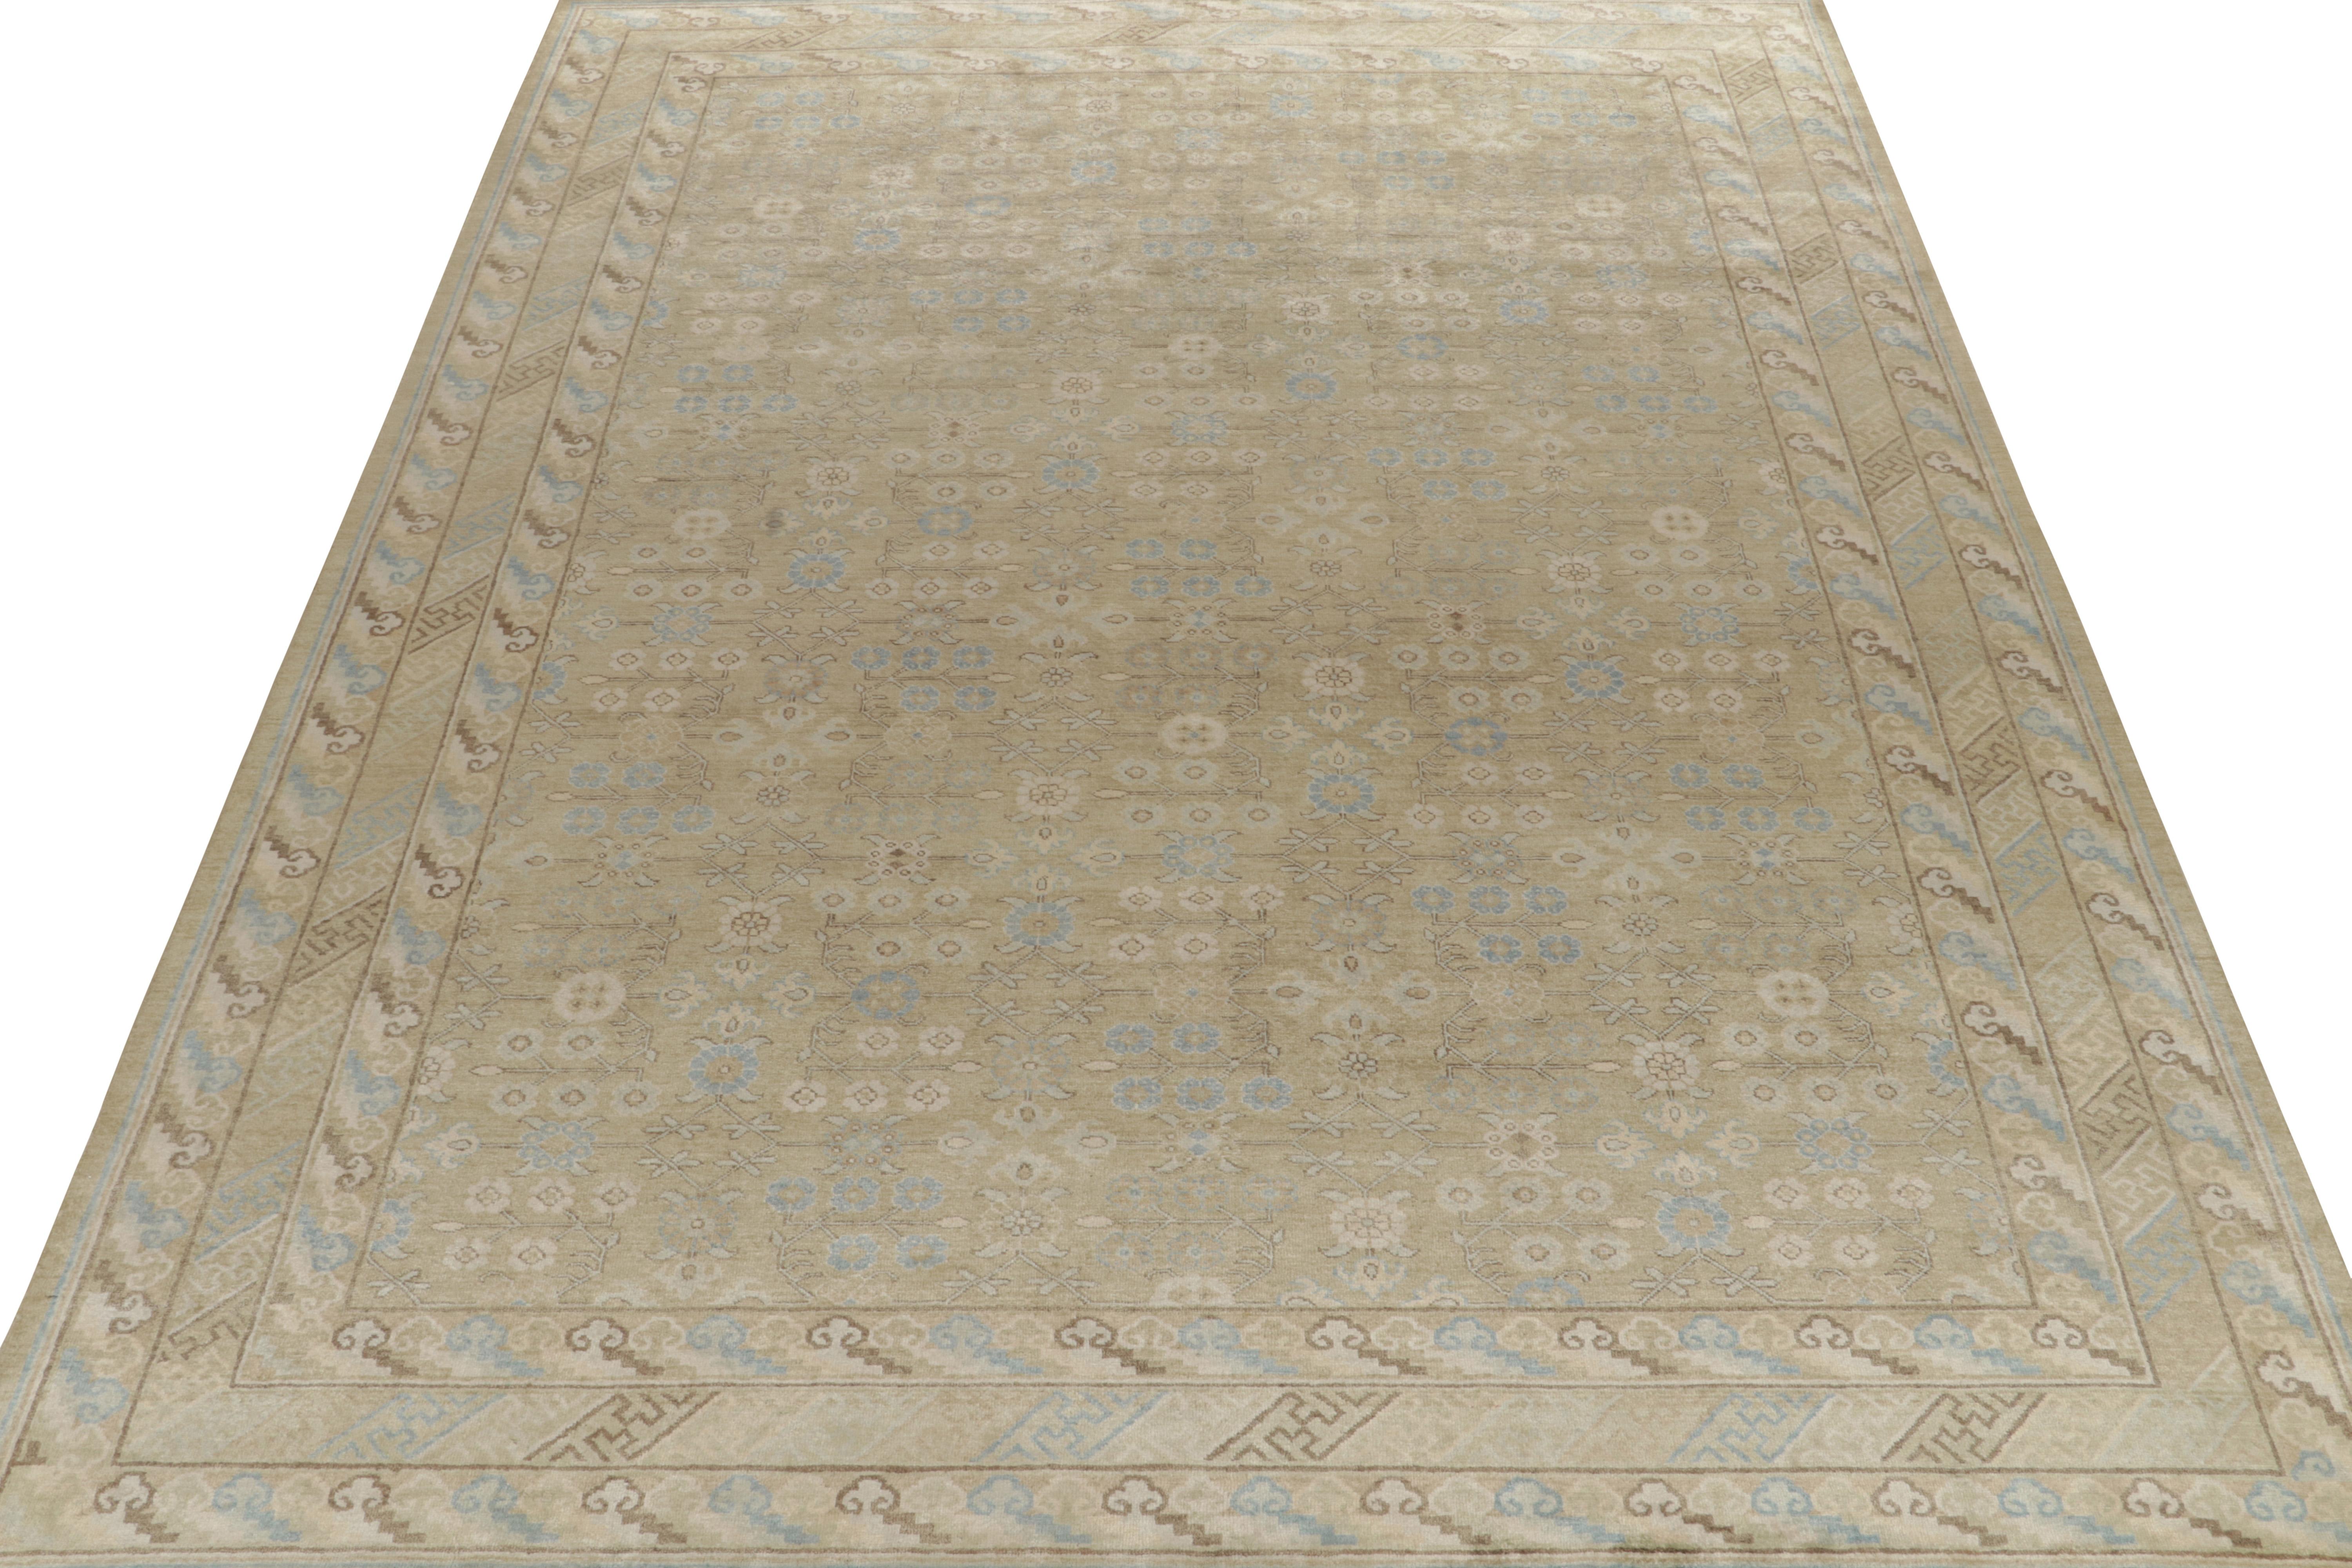 Indian Rug & Kilim’s Khotan Style Rug in Gold, Beige-Brown and Blue Patterns For Sale